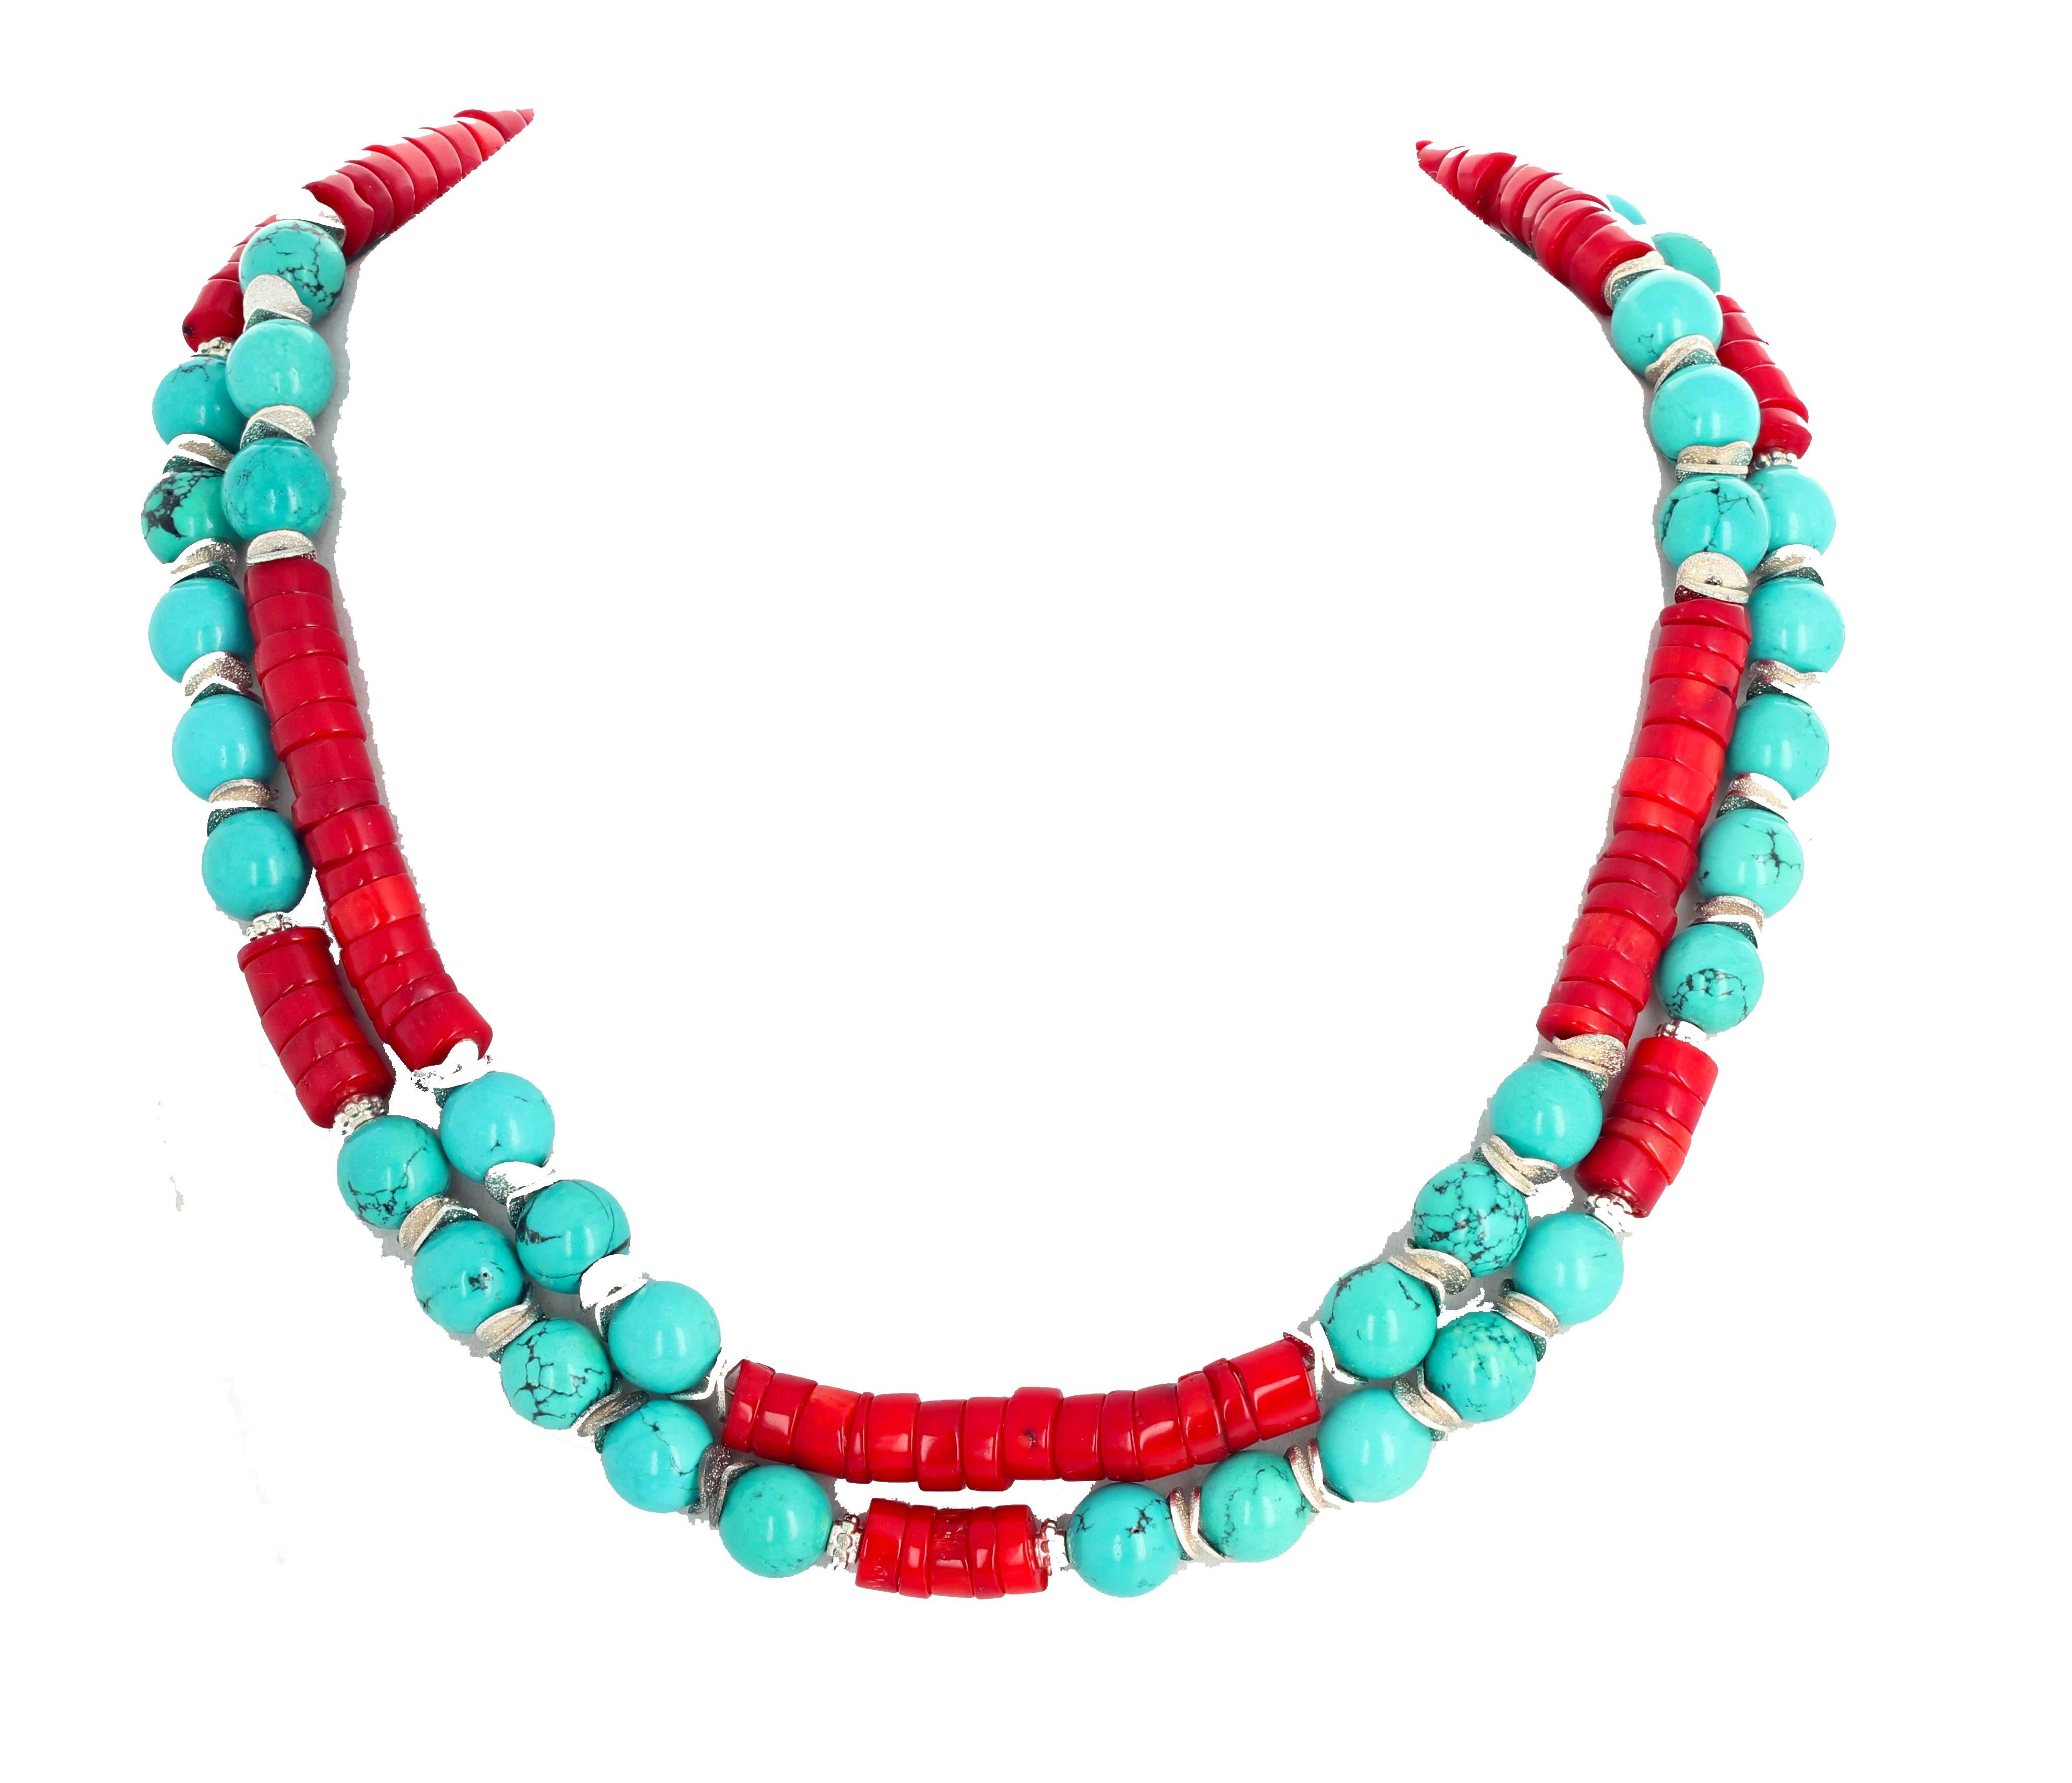 Double strand of highly polished round blue Turquoise enhanced with rondels of polished red Bamboo Coral set in this 19 inch long unique necklace with silver hook easy to use clasp. 